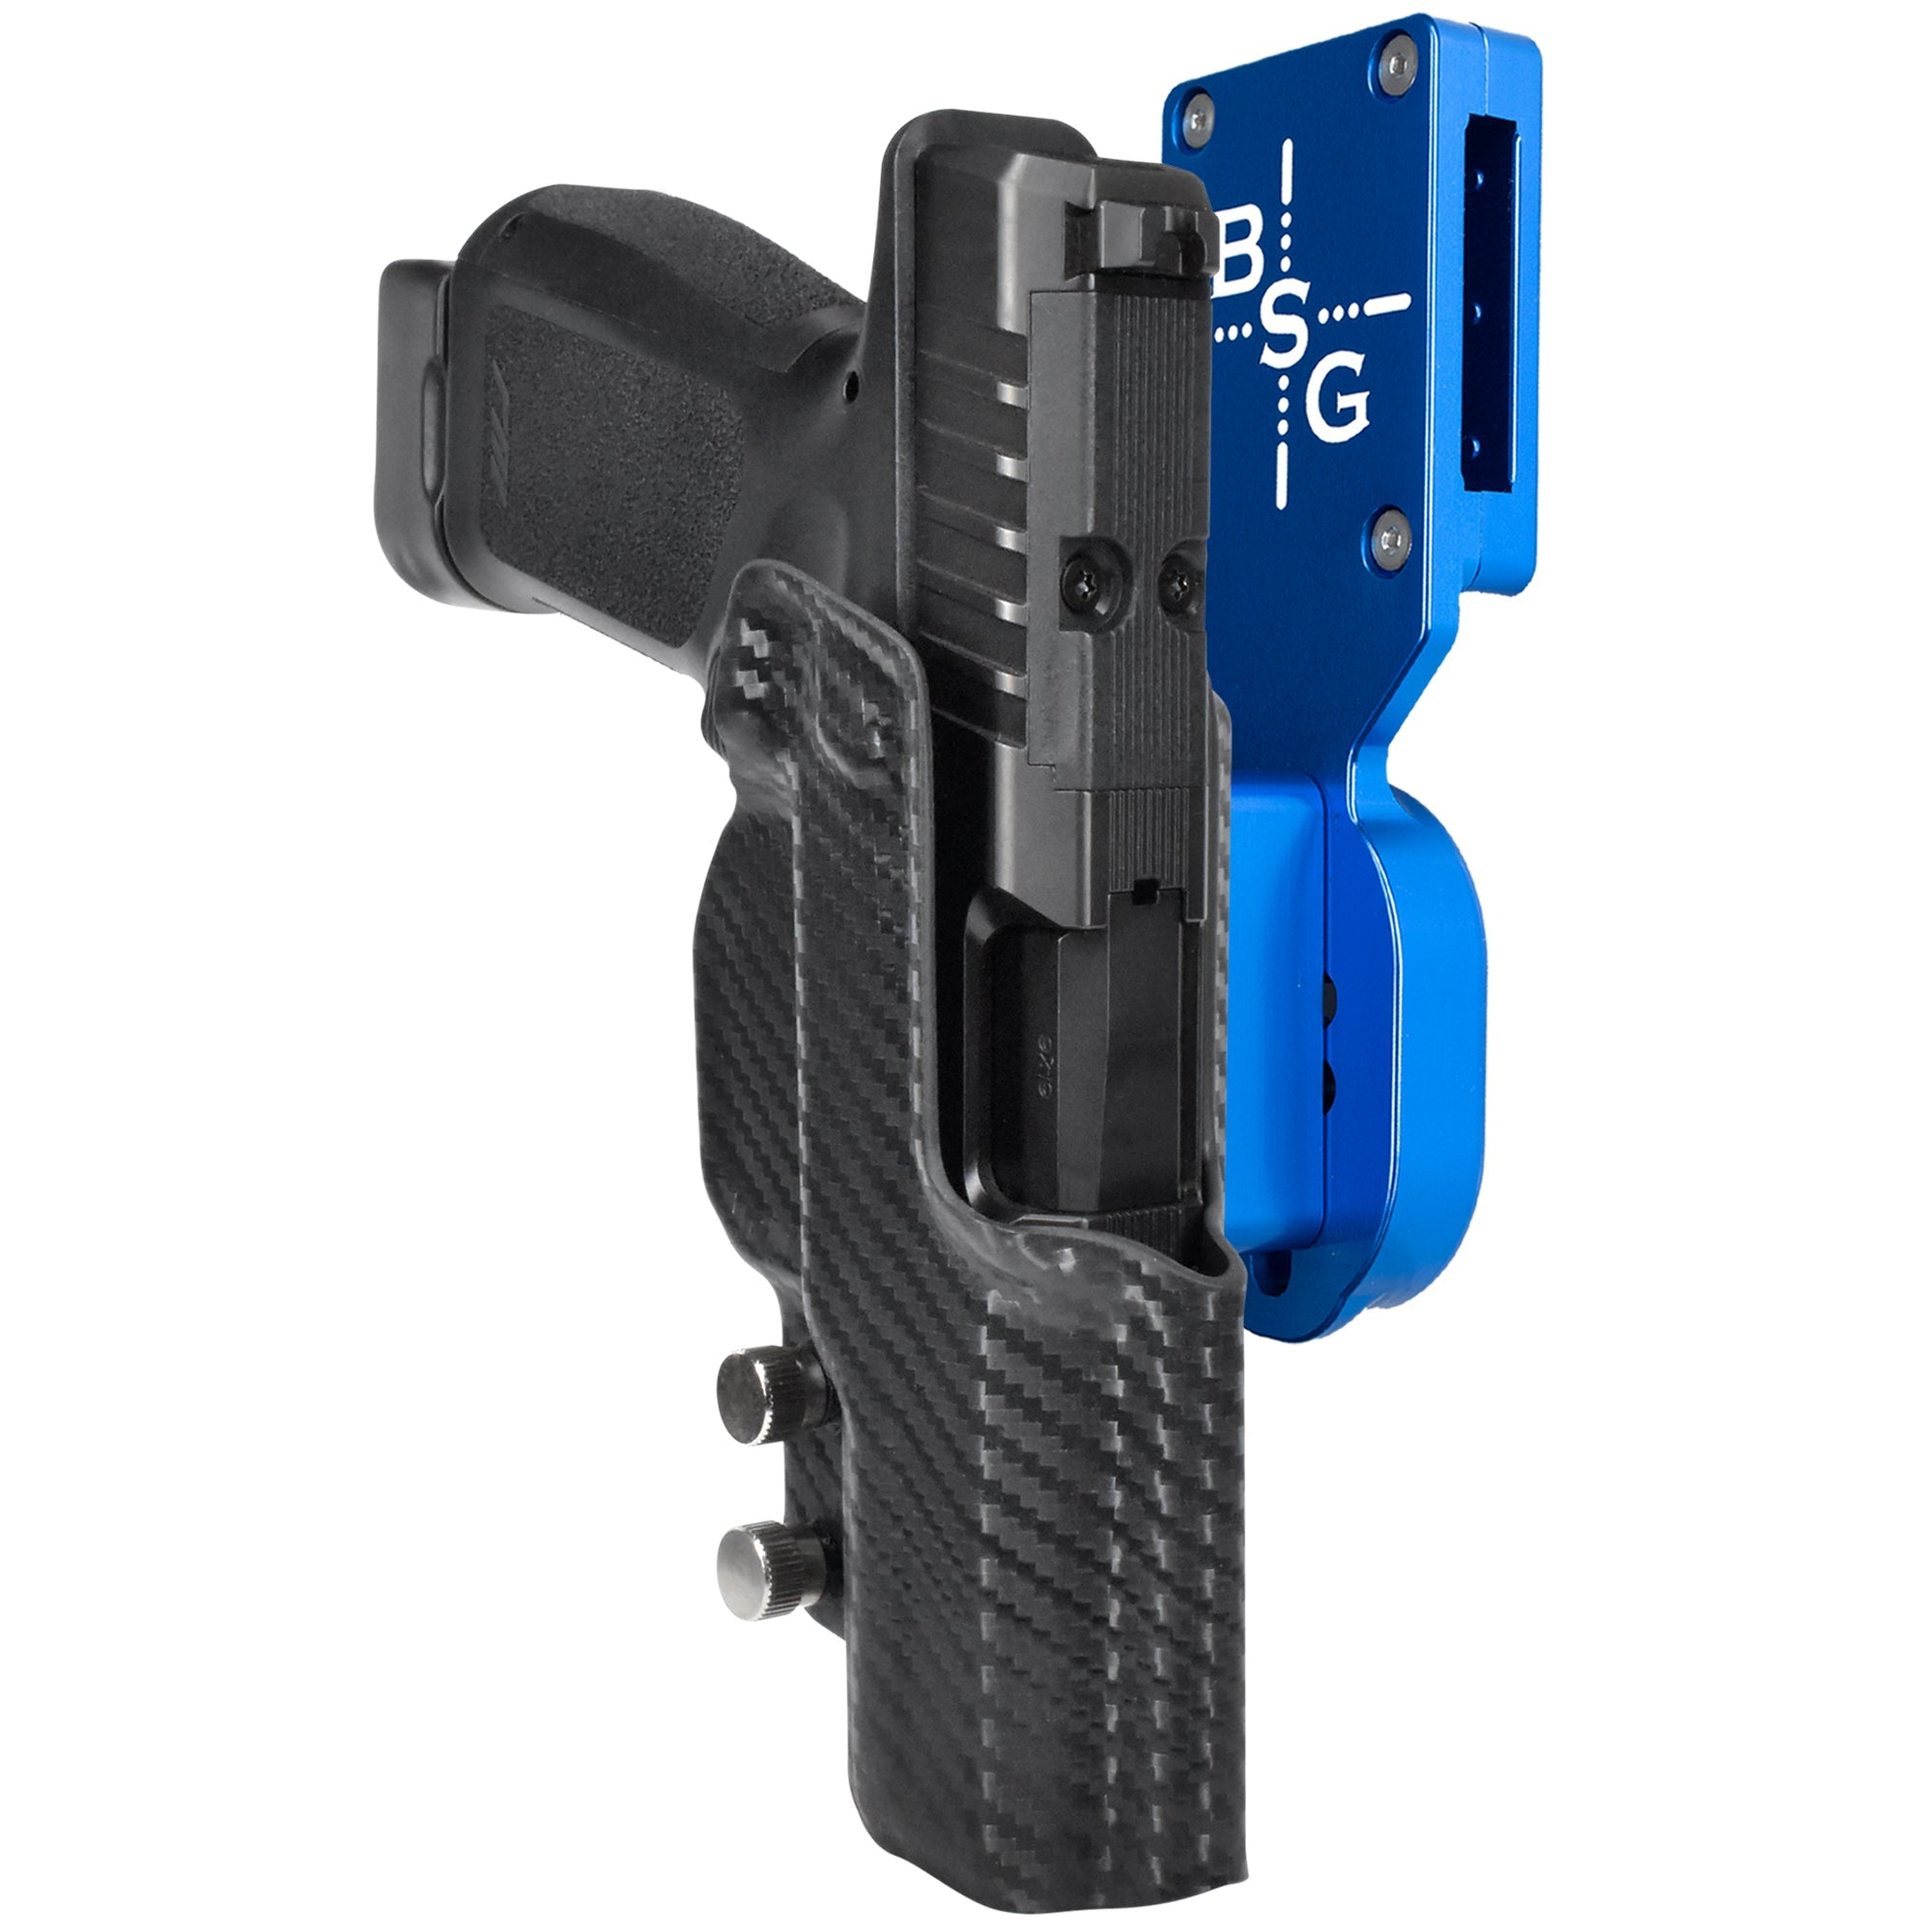 Rost Martin RM1C Pro Heavy Duty Competition Holster in Blue / Carbon Fiber